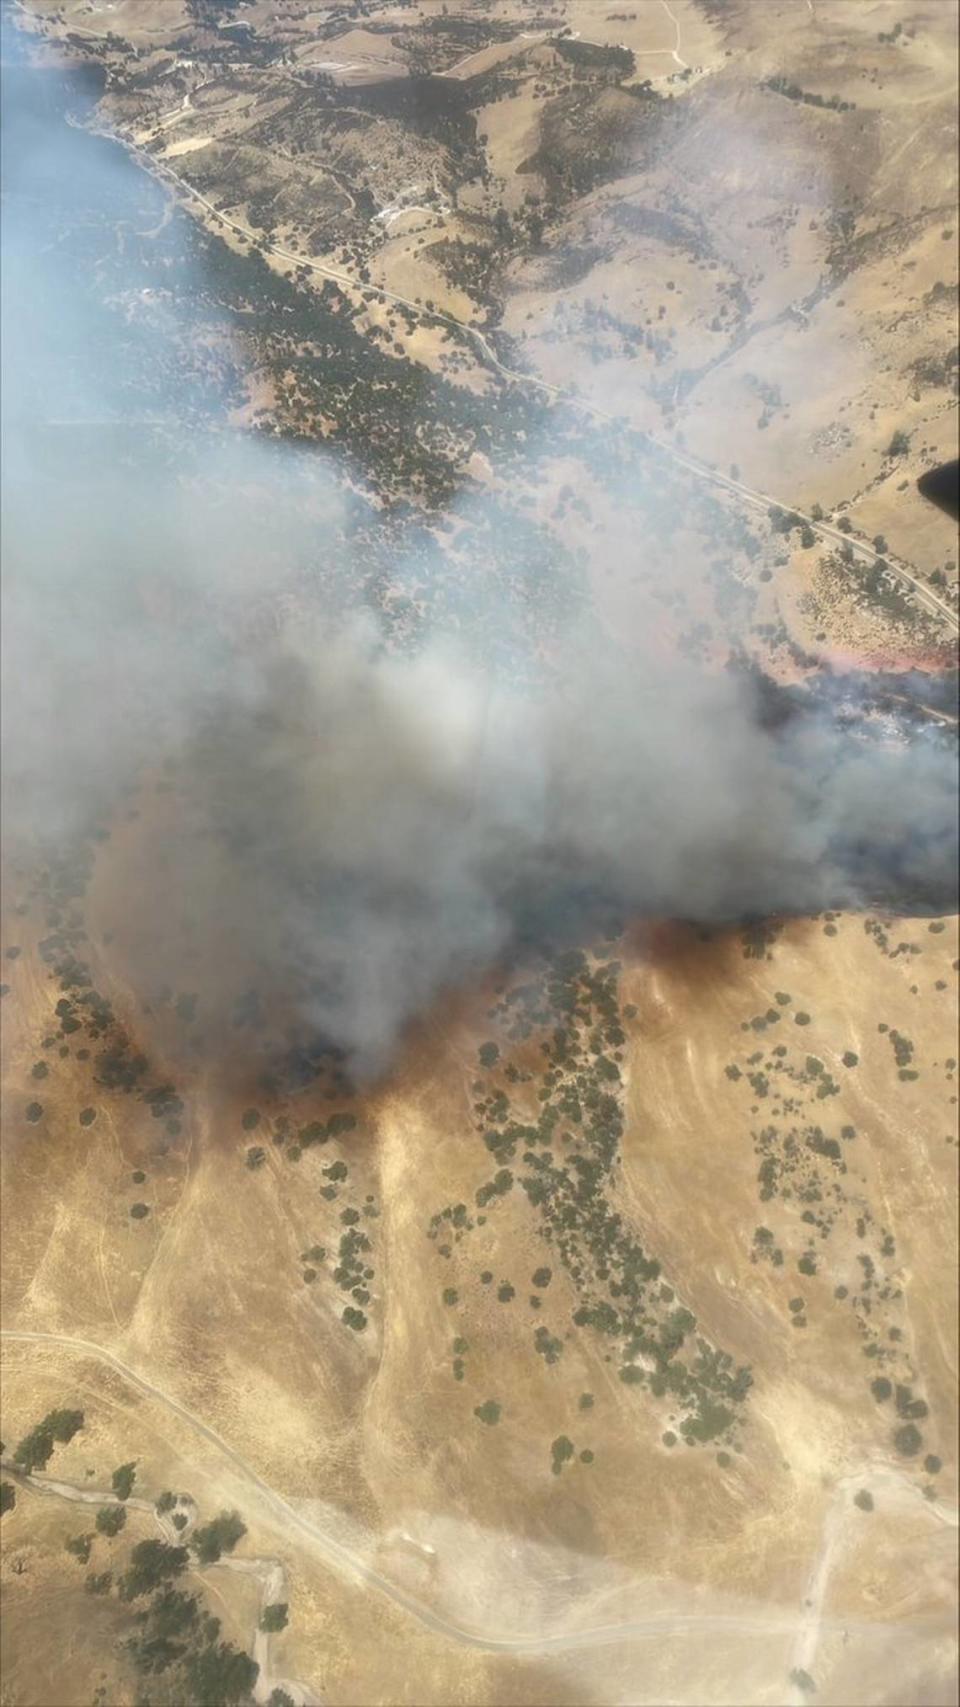 Smoke pouring from the fire east of Santa Margarita on July 30, 2023.